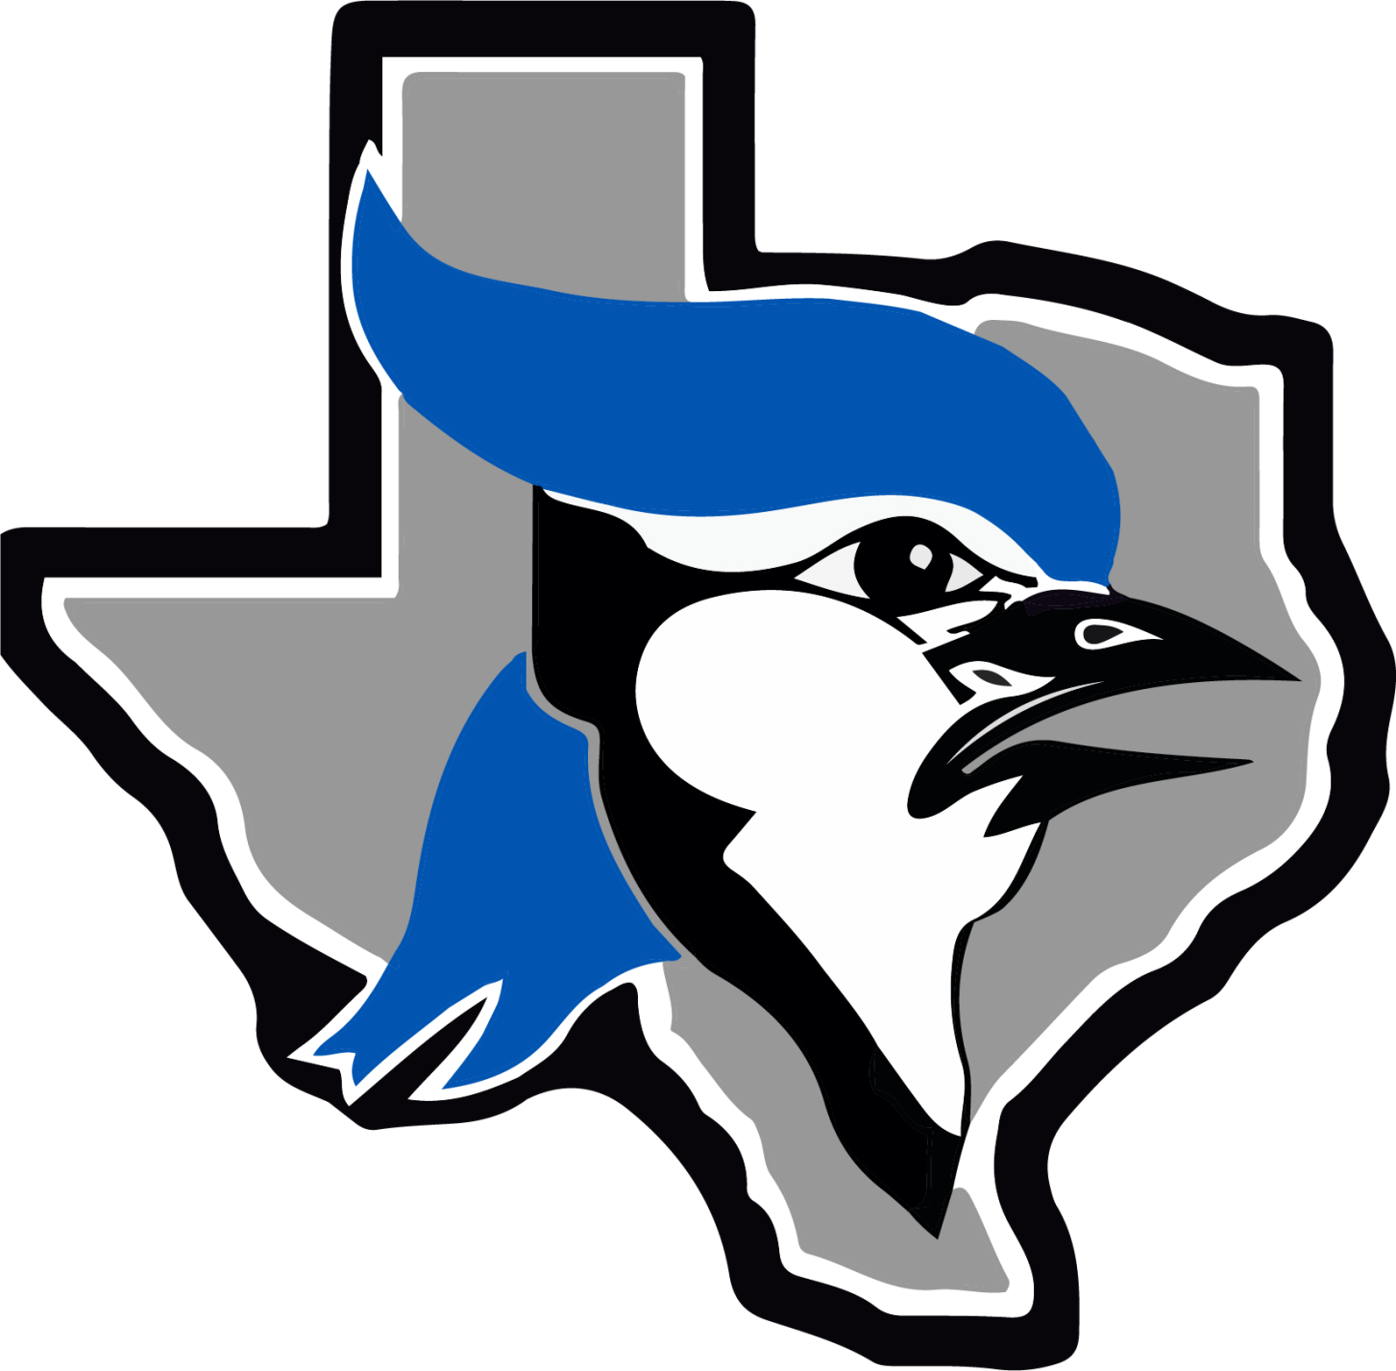 Needville ISD announces plans for 2020-21 school year | News | fbherald.com